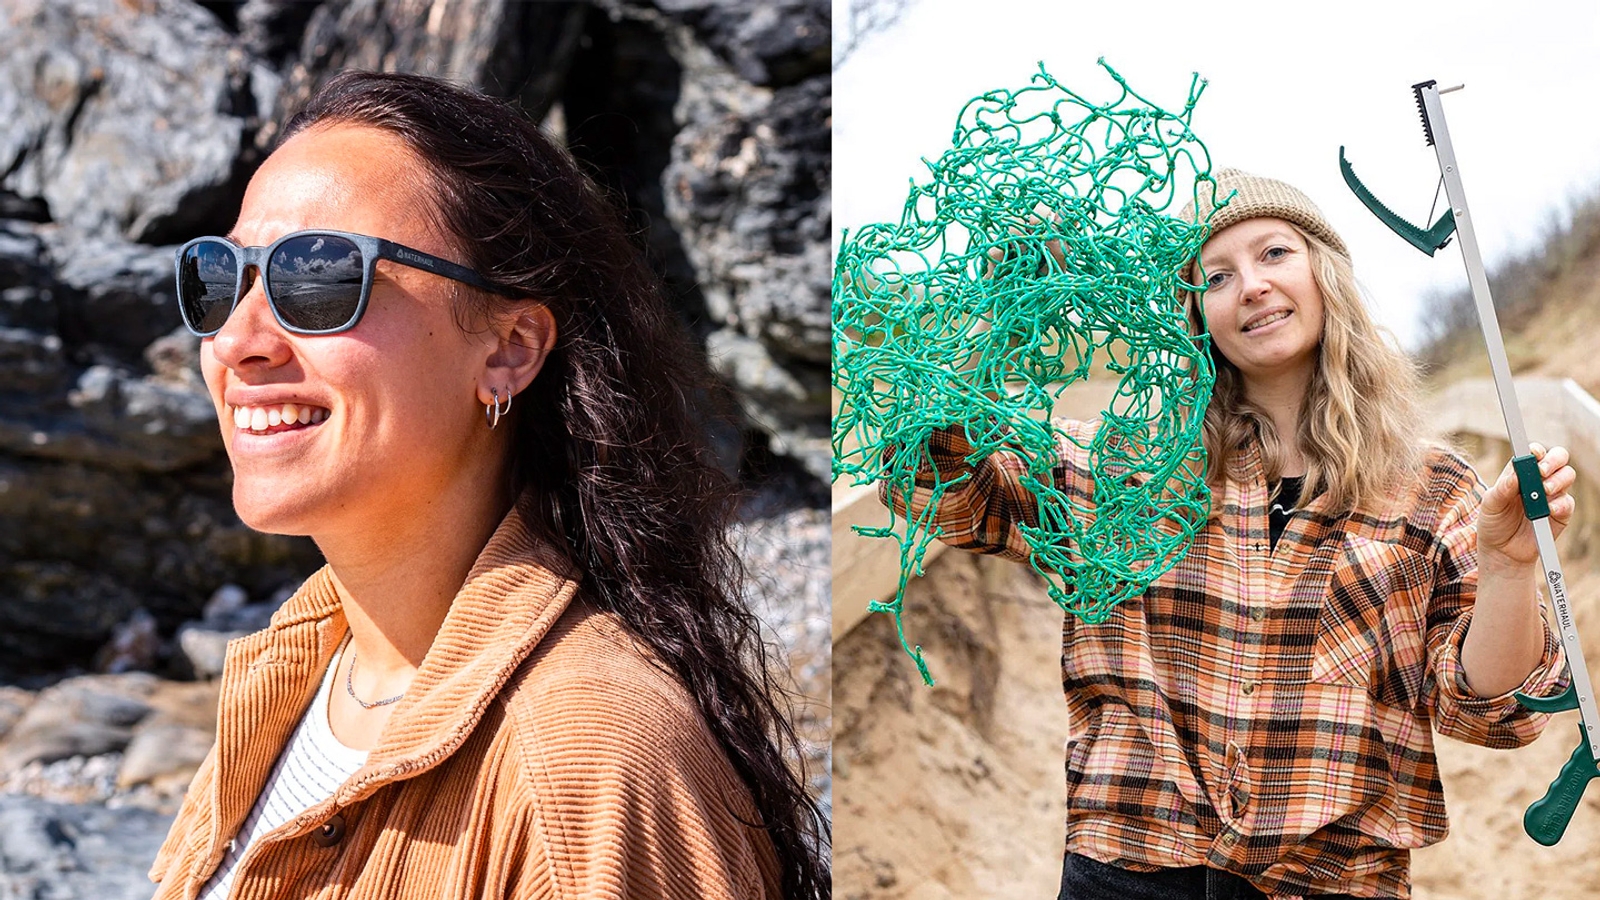 A model wearing a pair of dark Waterhaul sunglasses and a volunteer holding up green fishing nets on a beach